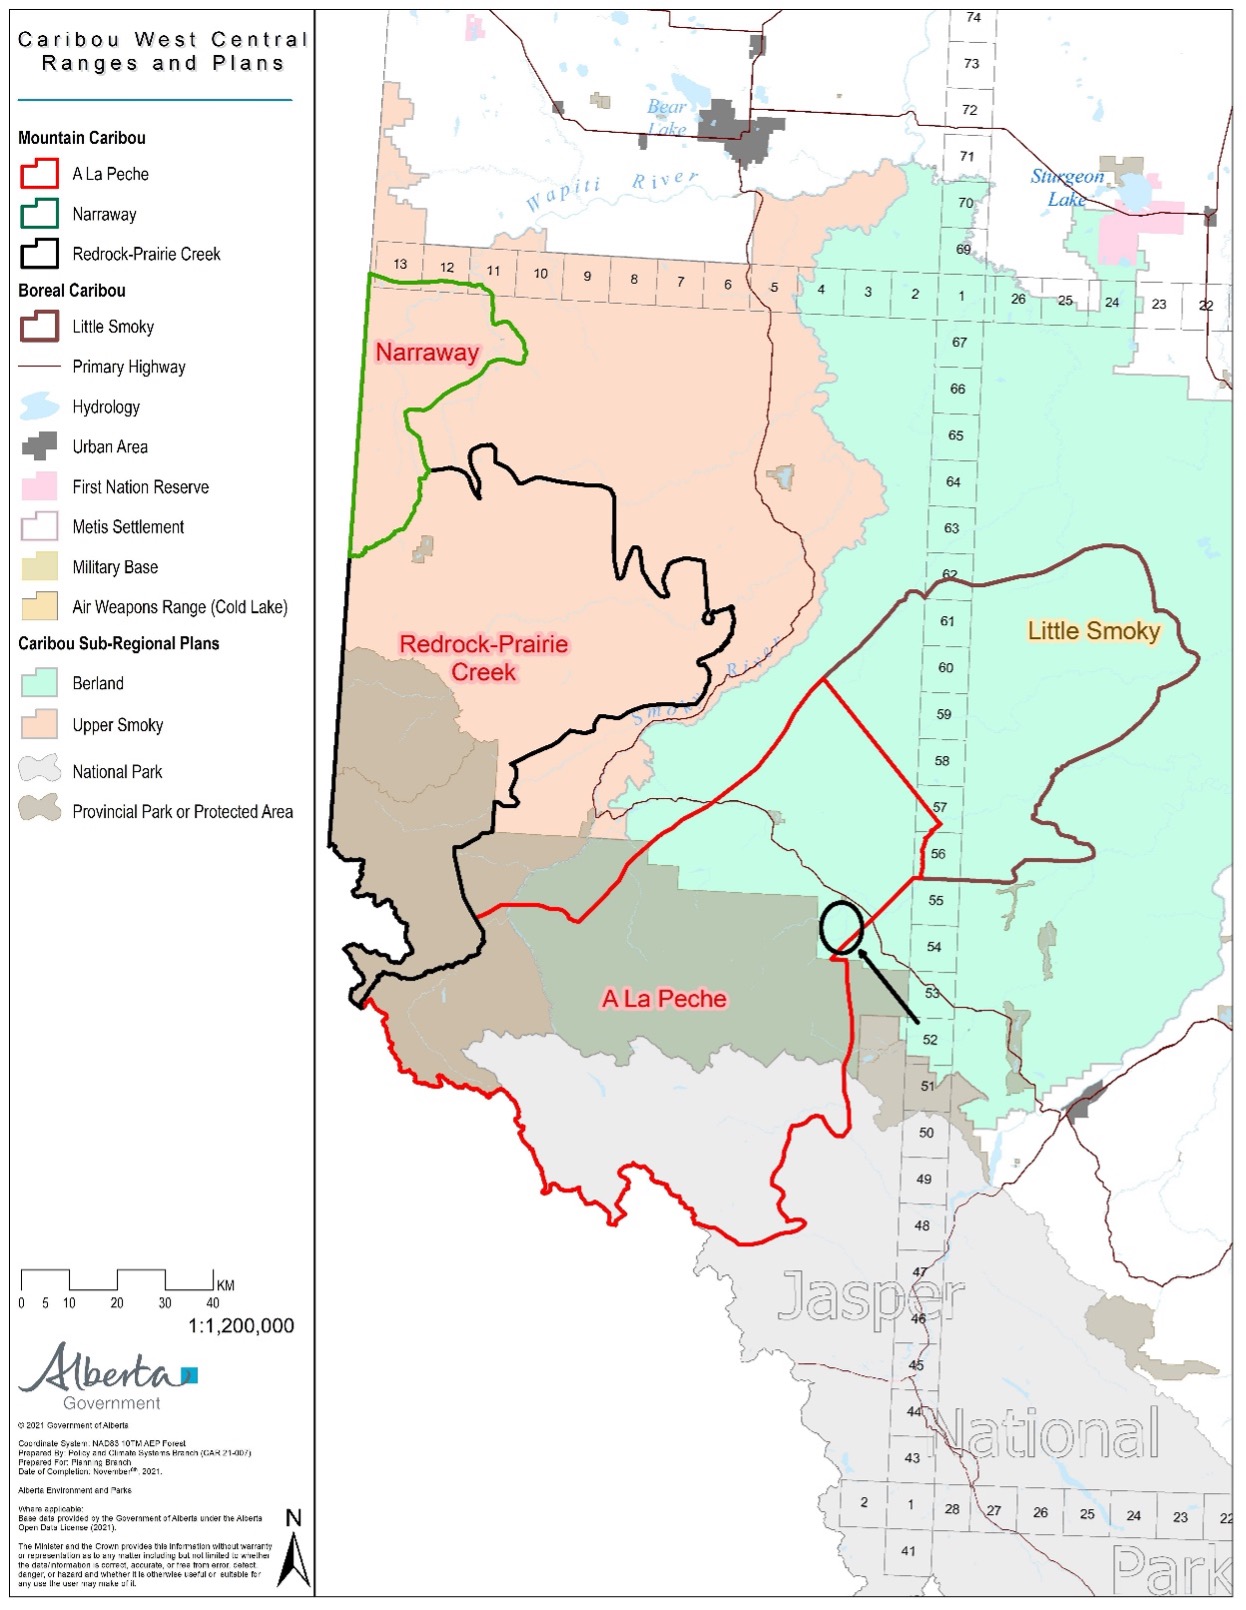 Map 1: Deferred Logging Area within West Central Alberta Caribou Ranges and Sub-Regional Plan Area. West Fraser has deferred its logging plans in the Moon Creek area (circled) of the À La Pêche caribou range. Alberta declared a No Harvest Zone (see Map 2 below) in the undisturbed caribou habitat until it approves a land-use plan for the Berland sub-region (shaded green). Map source: Government of Alberta, 2021; circled area added by Alberta Wilderness Association, 2022.